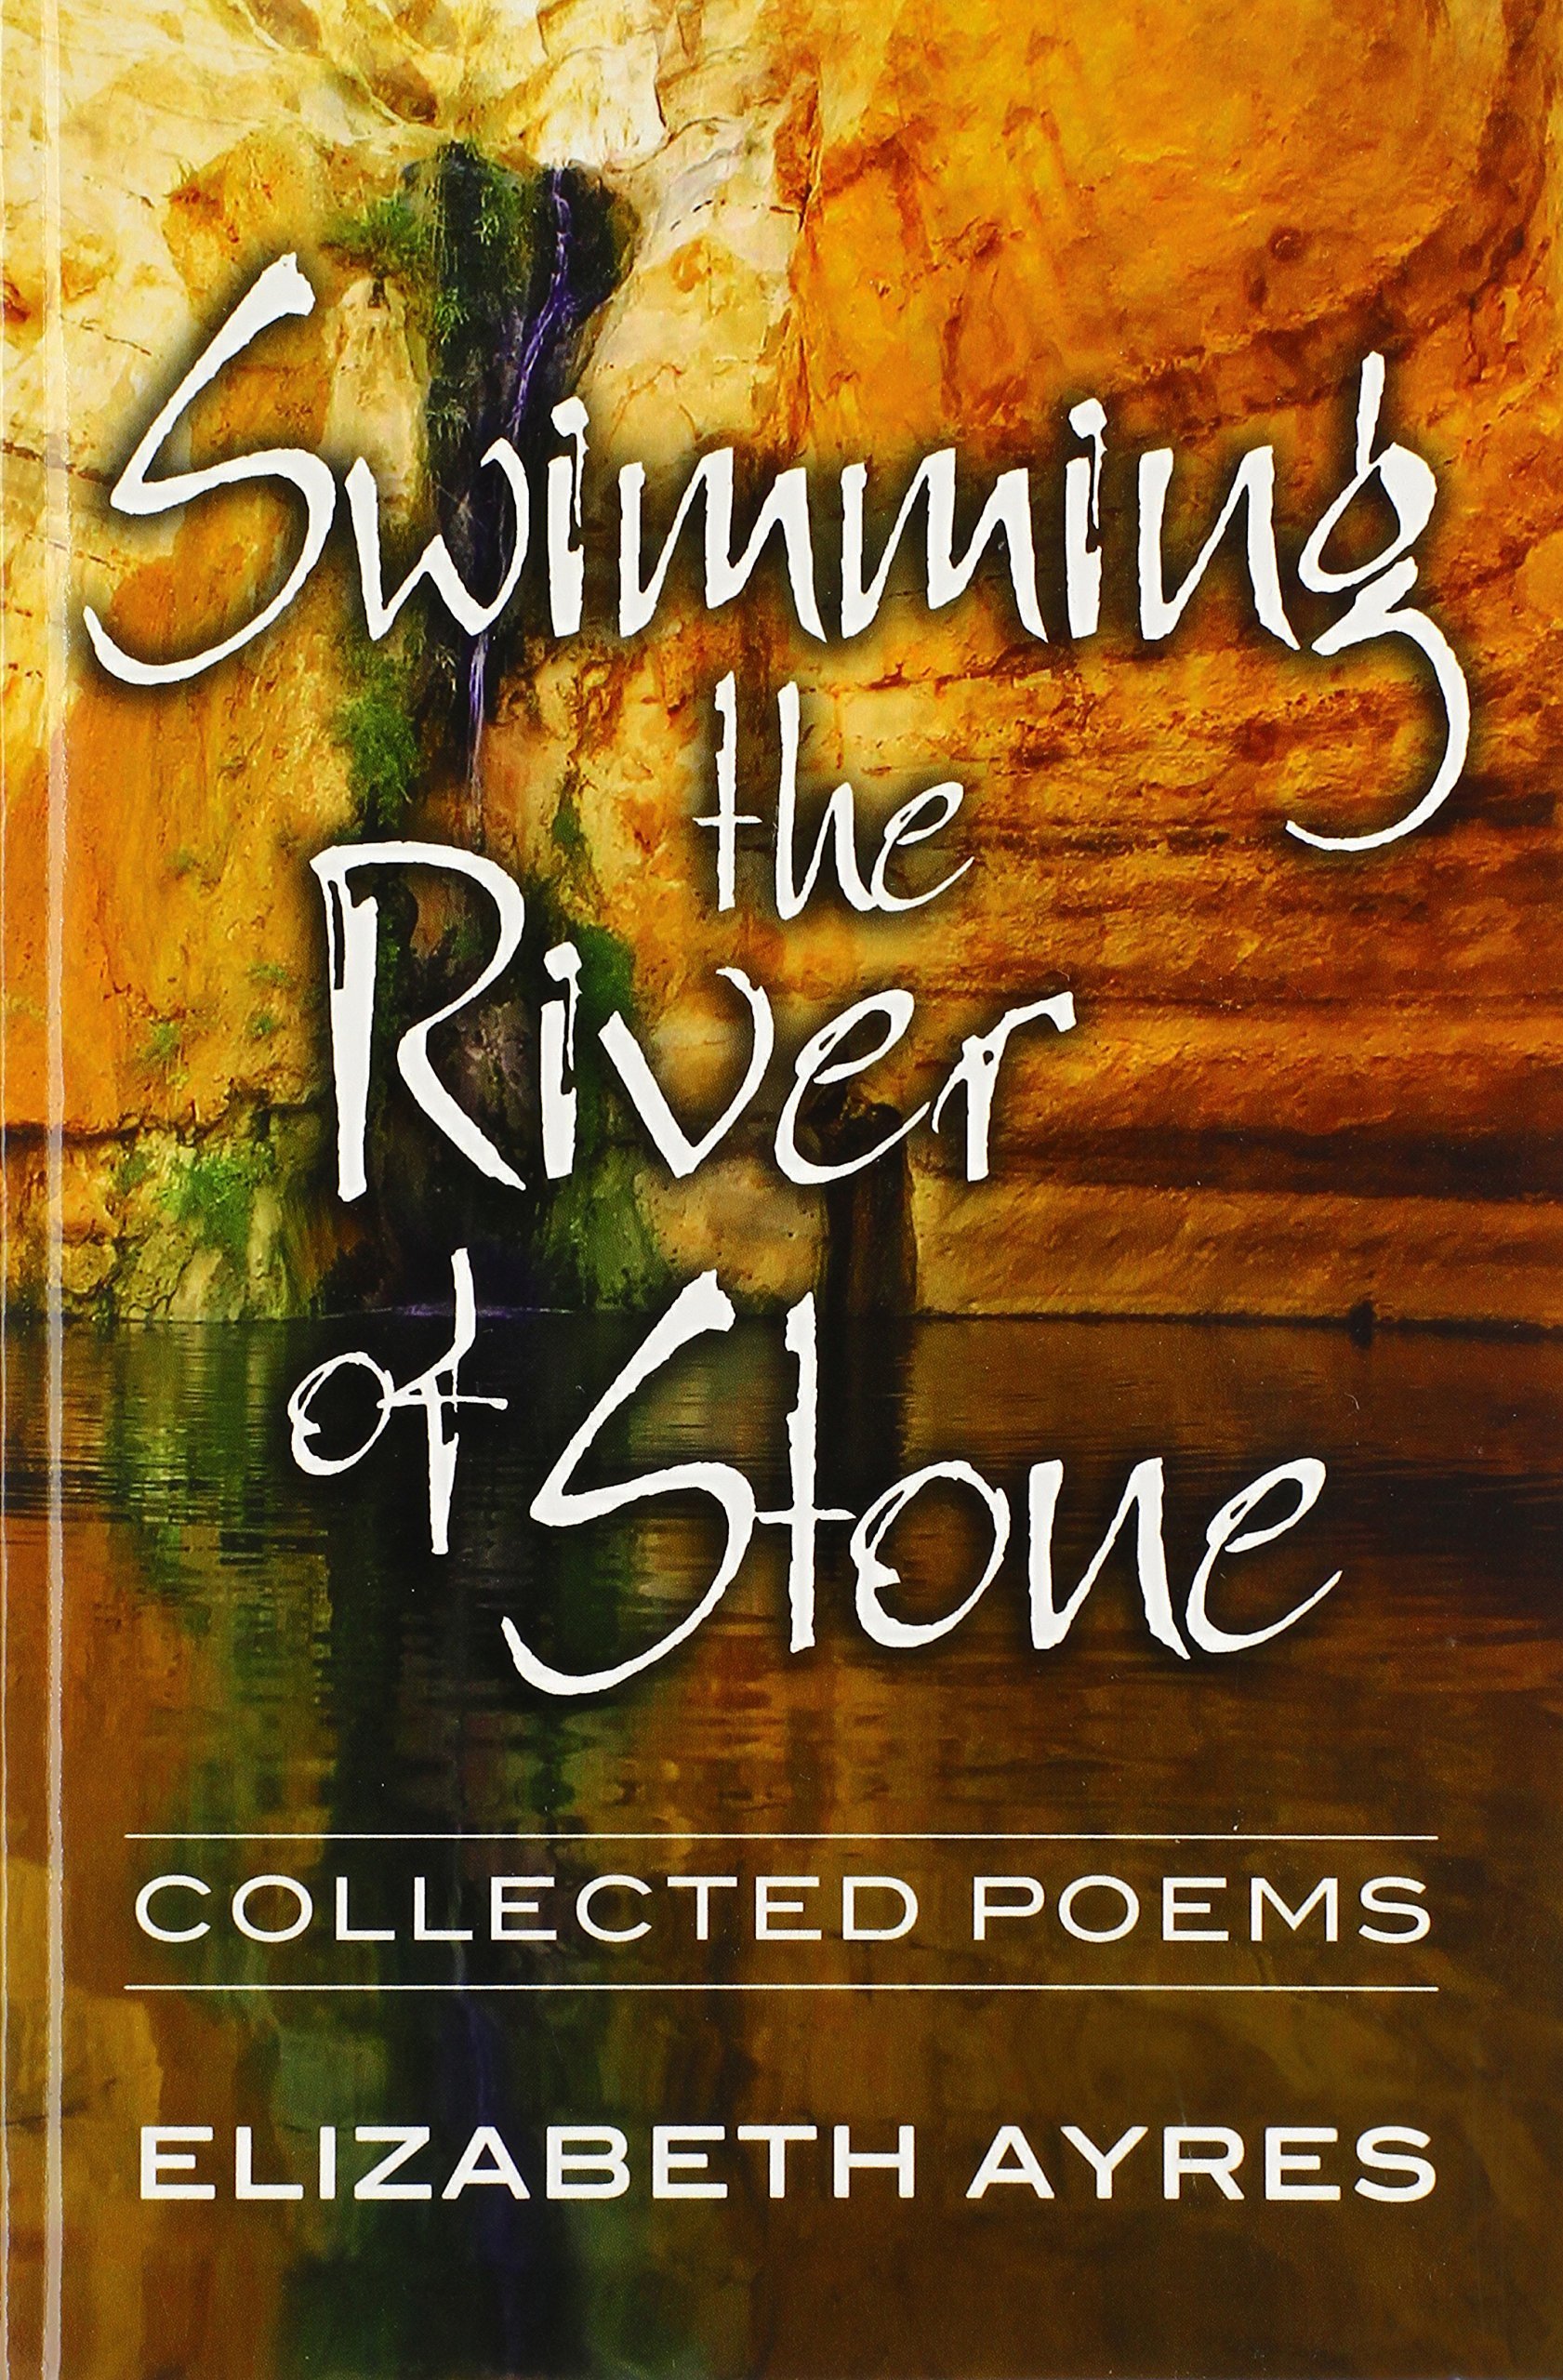 Swimming the River of Stone: Collected Poems